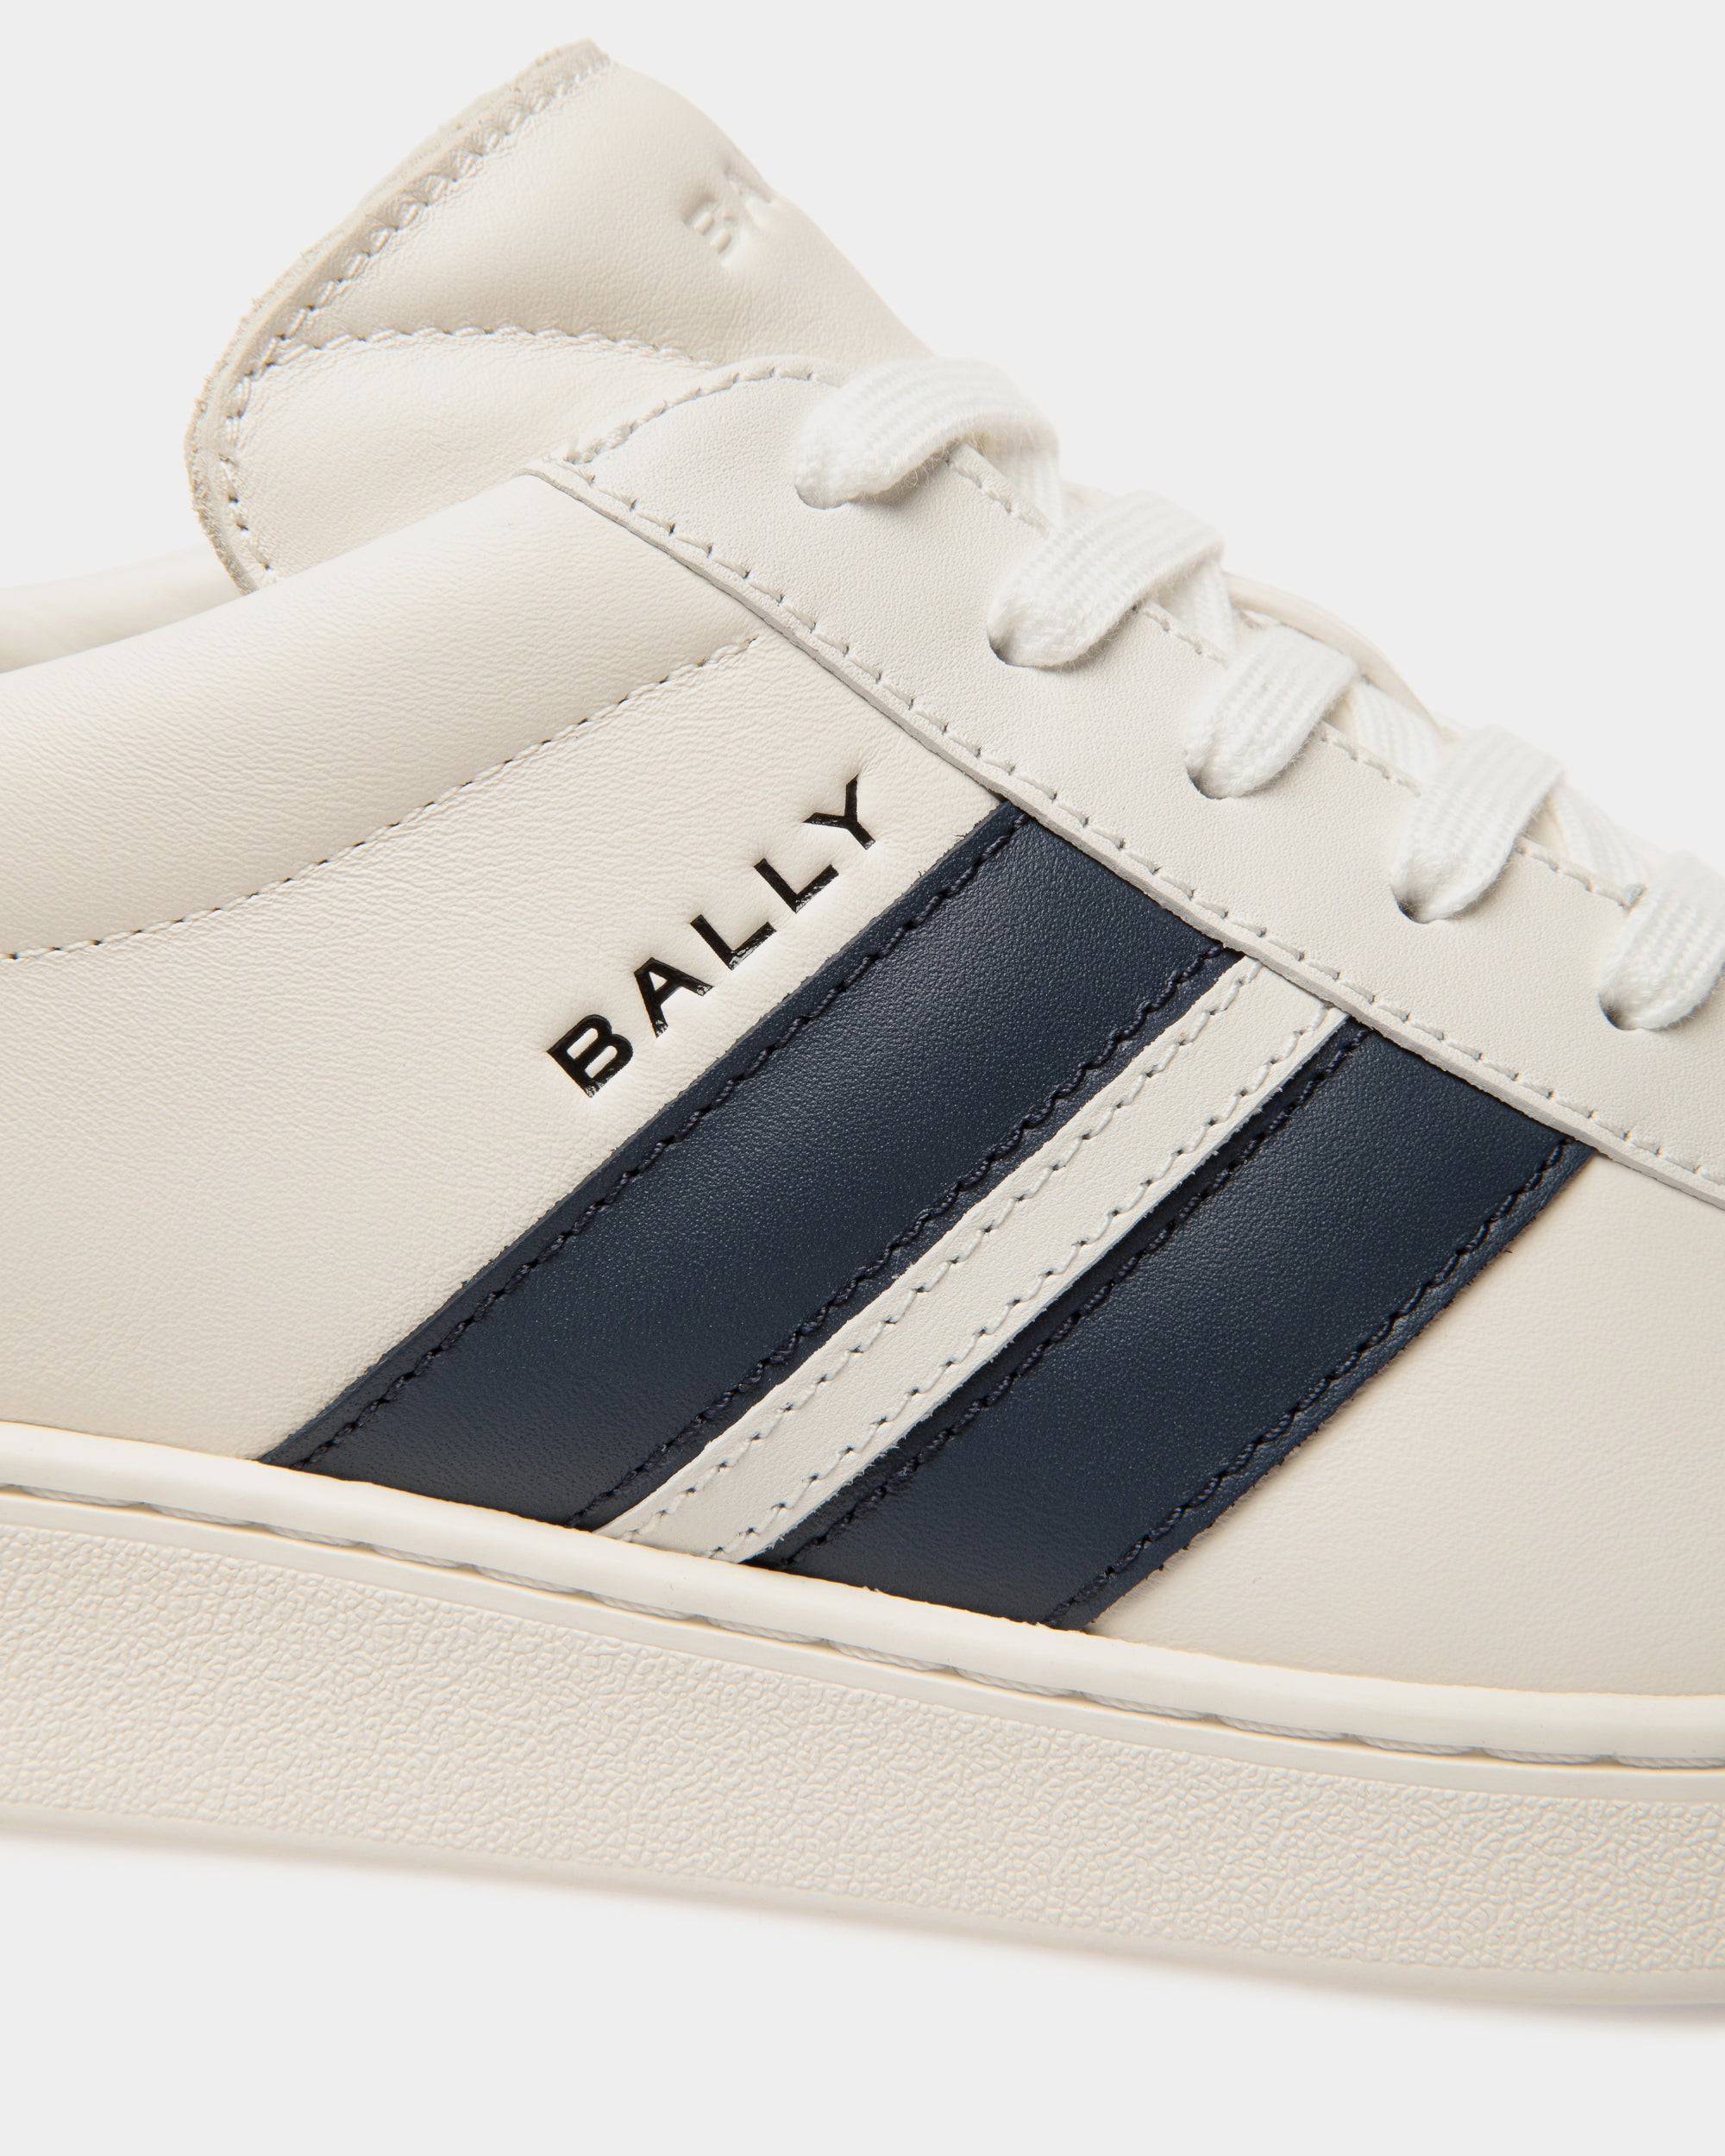 Tennis Sneaker in White and Navy Blue Leather - Men's - Bally - 06